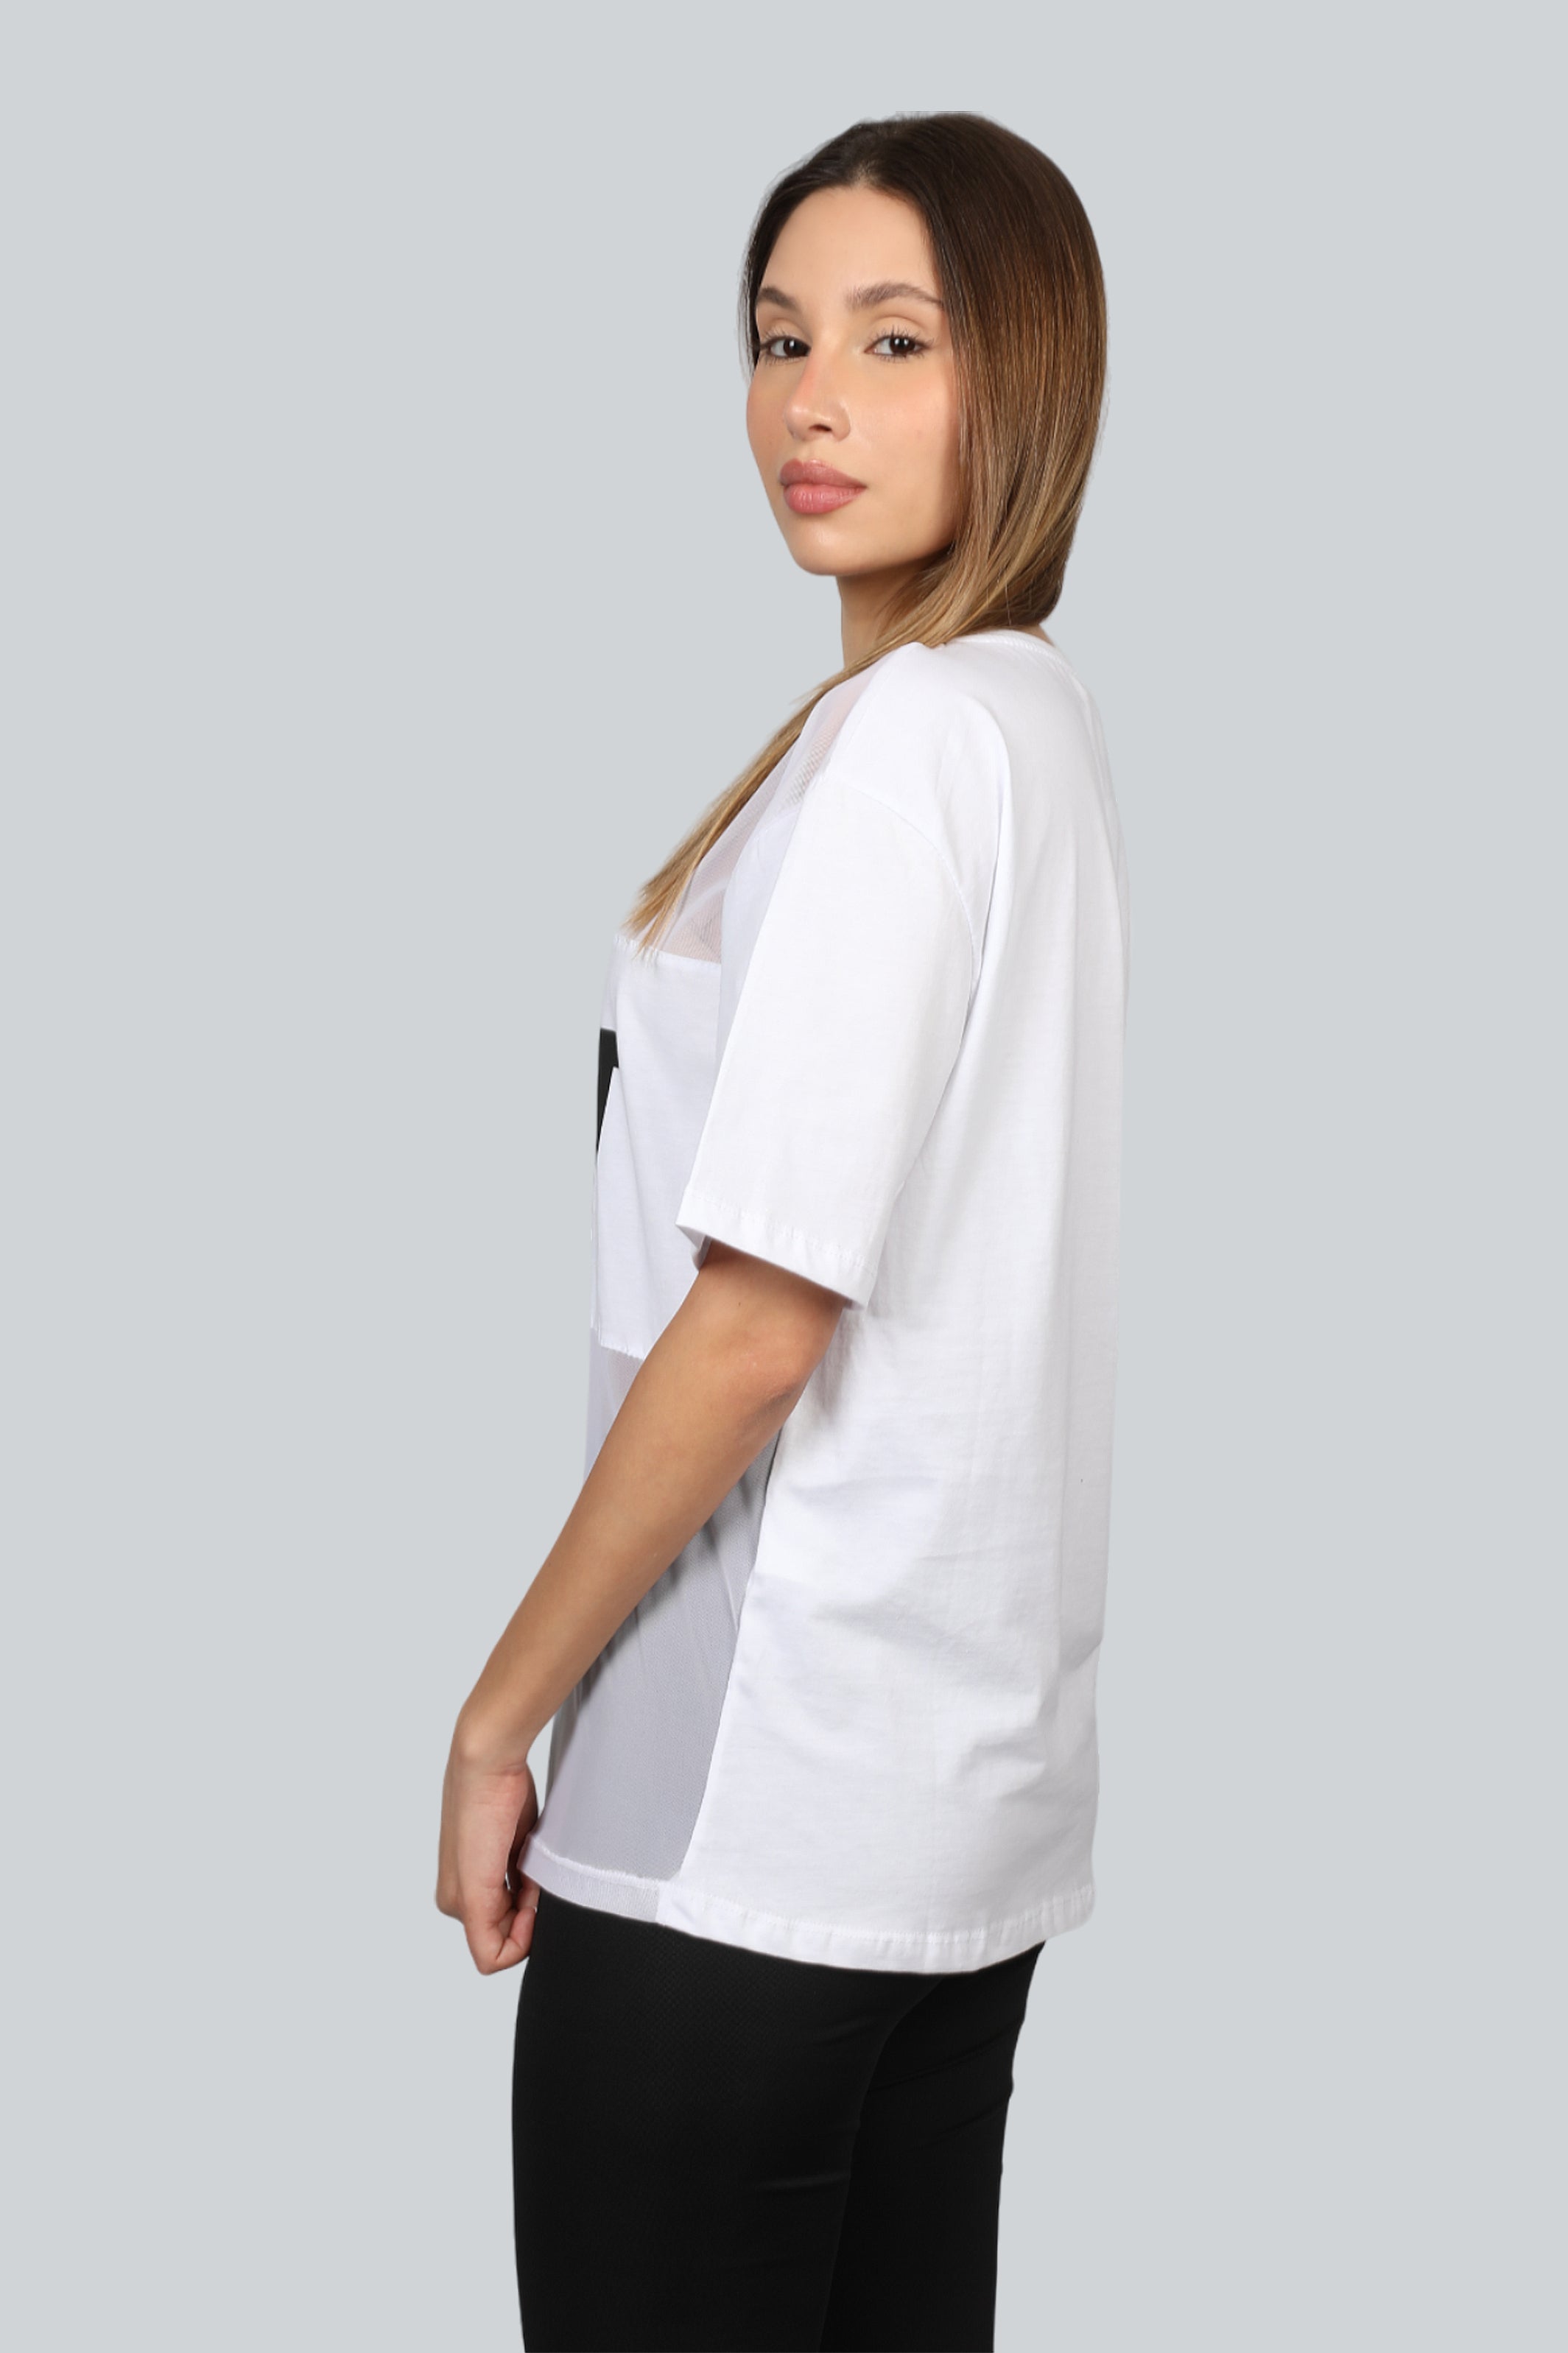 Women White T-shirt See Throw With "Start" Front Logo